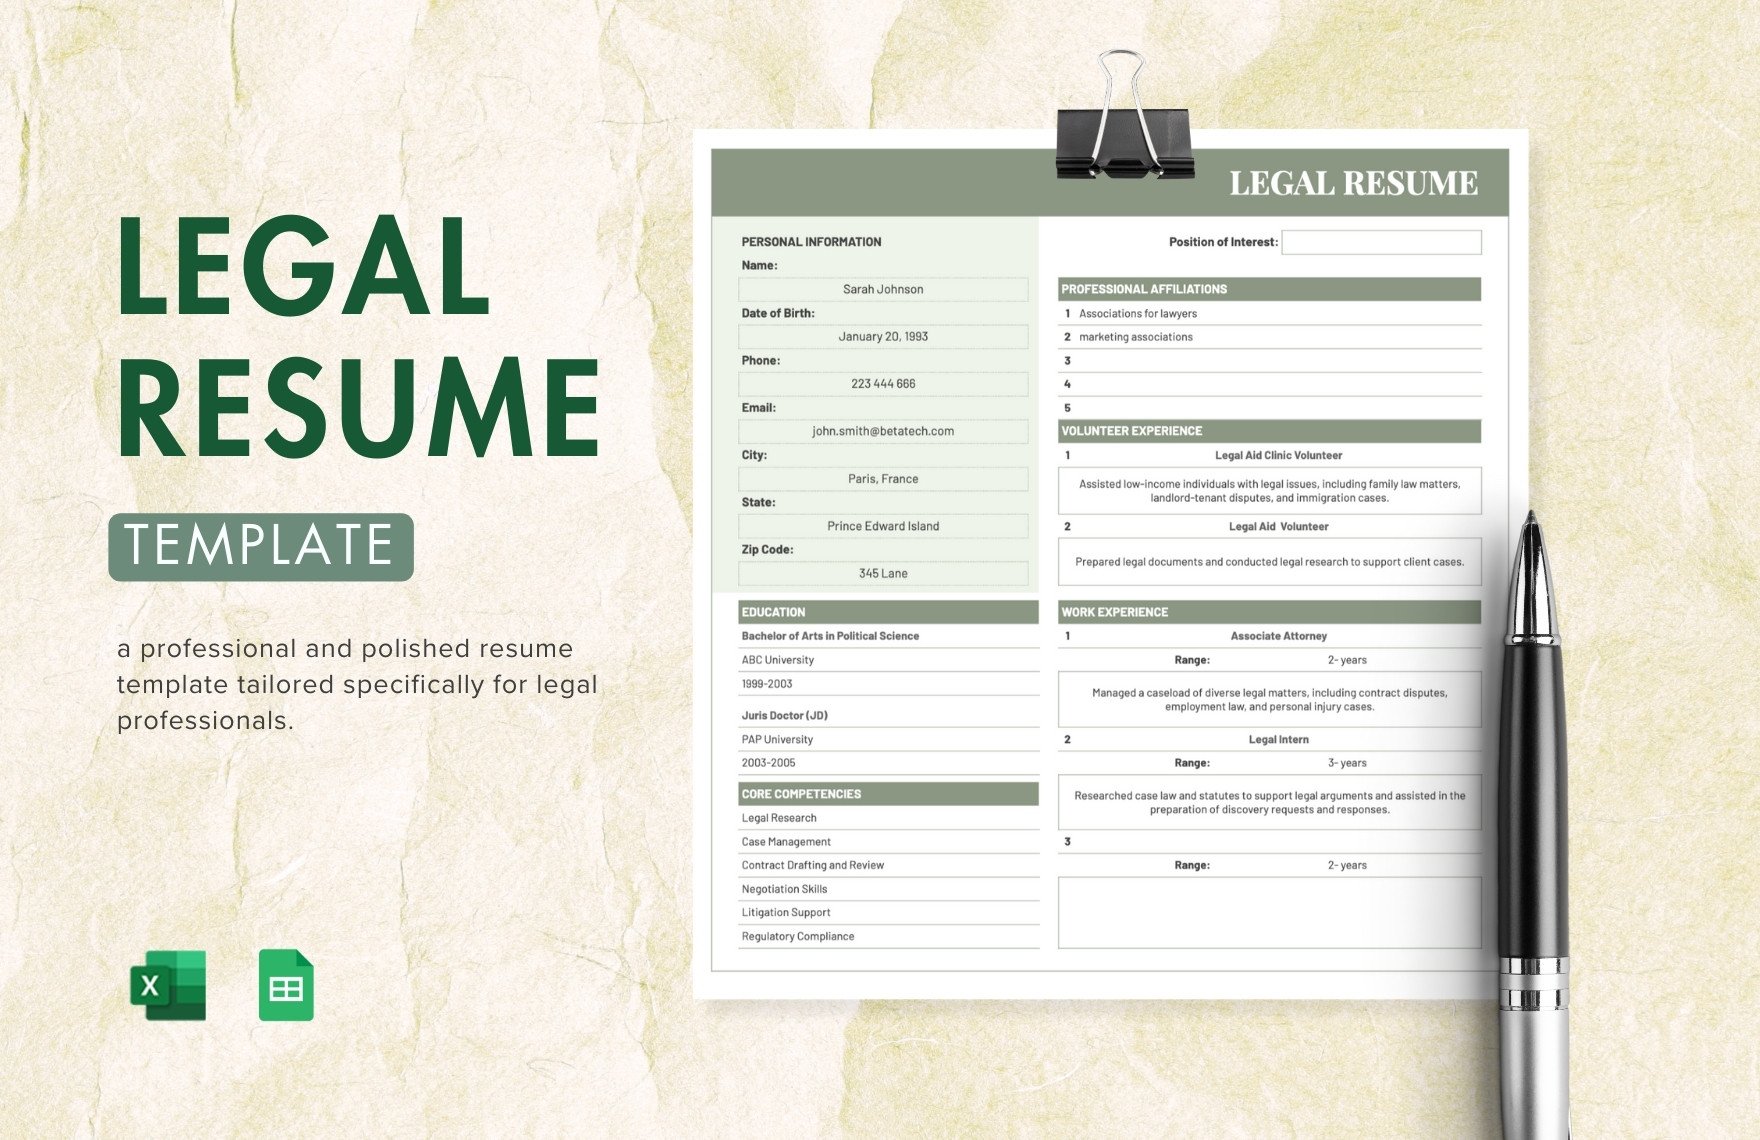 Legal Resume Template in Excel, Google Sheets